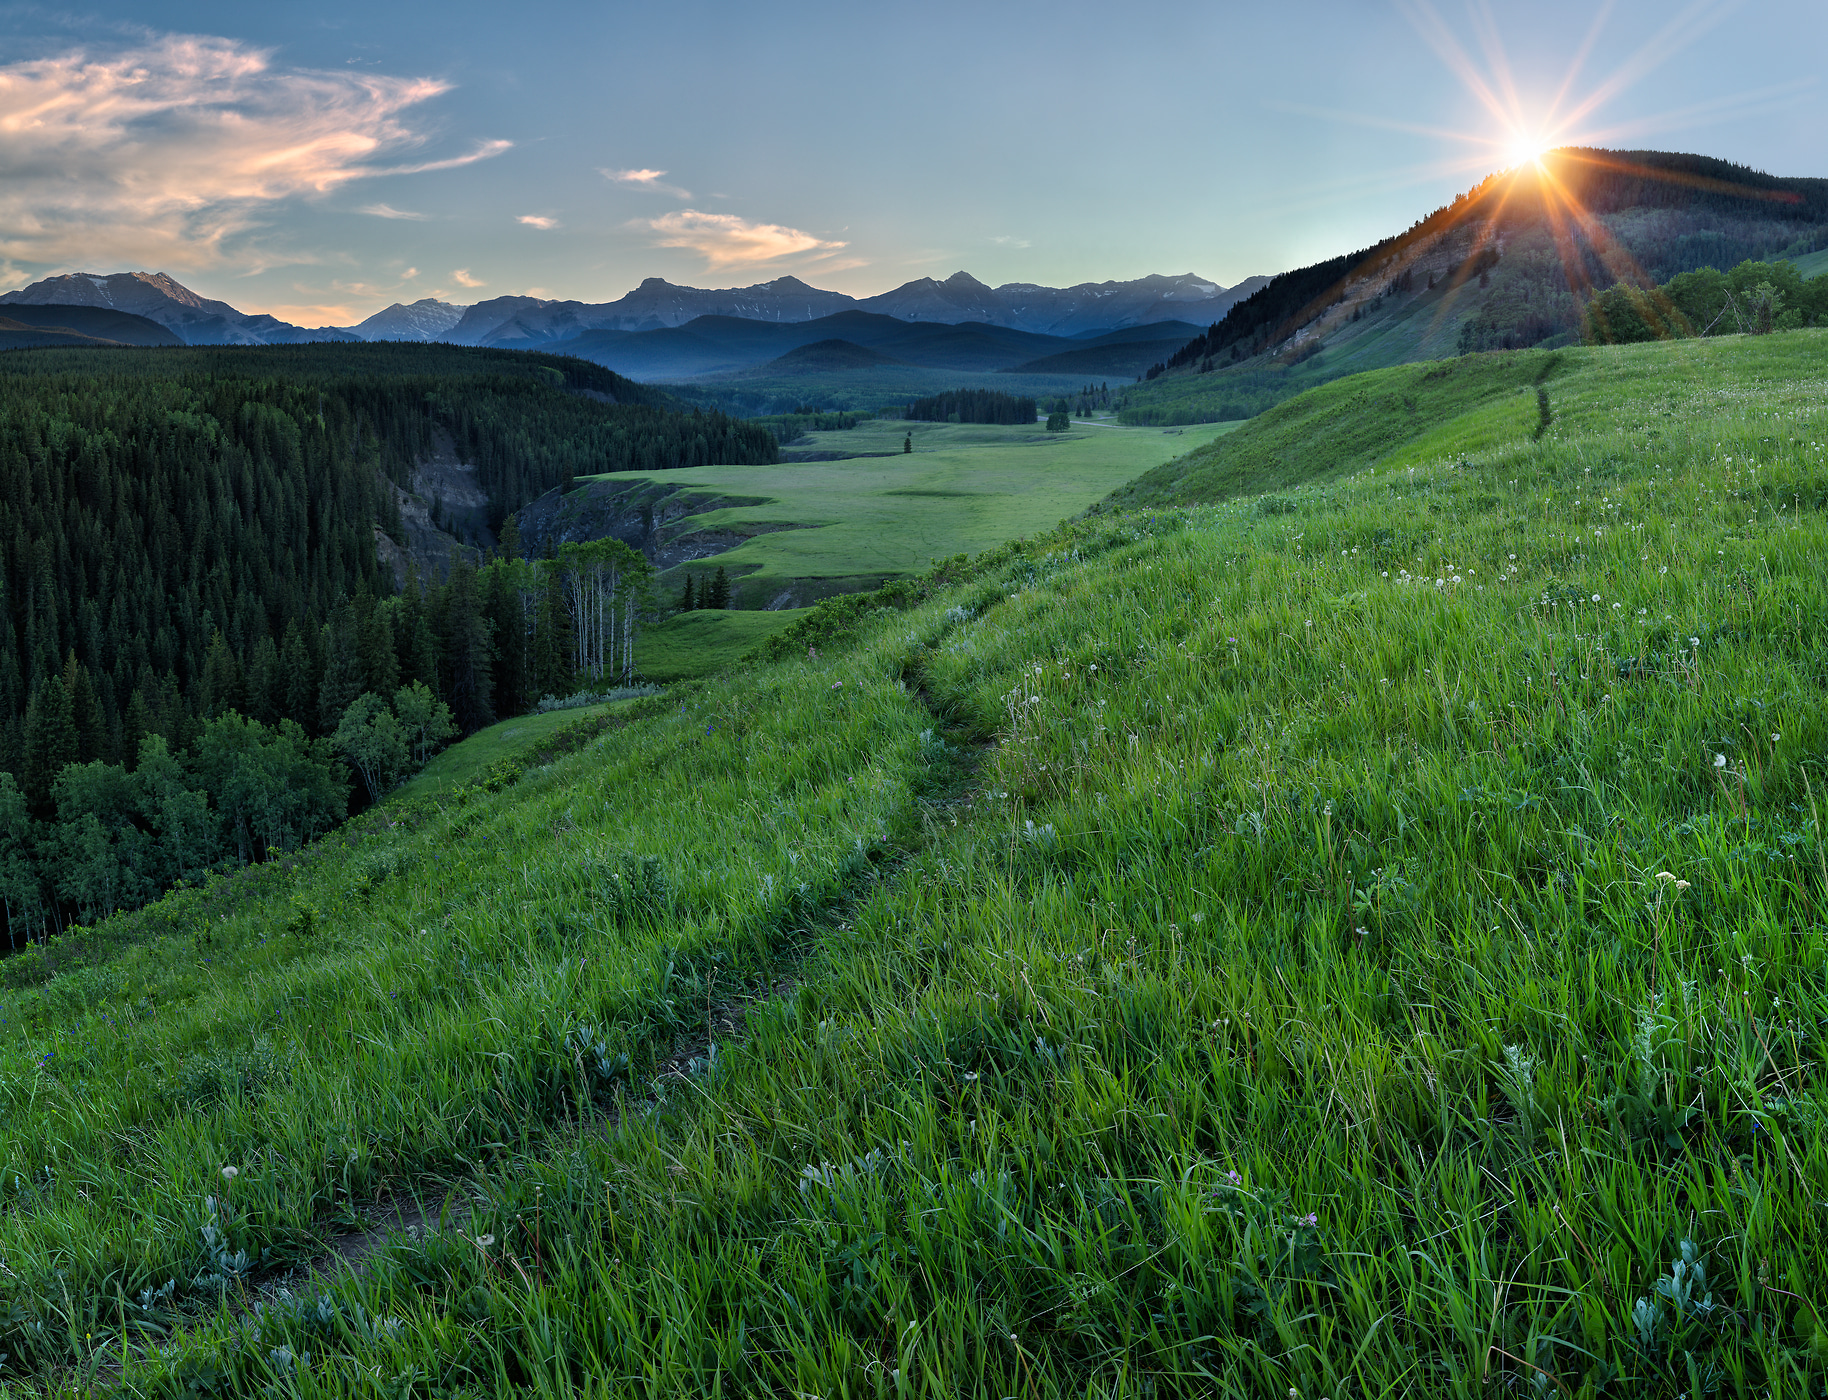 3,375 megapixels! A very high resolution, large VAST photo print of a trail in verdant hills and mountains at sunset; inspirational landscape photograph created by Scott Dimond in Bighorn Sheep Meadow, Kananaskis Country, Alberta Canada.